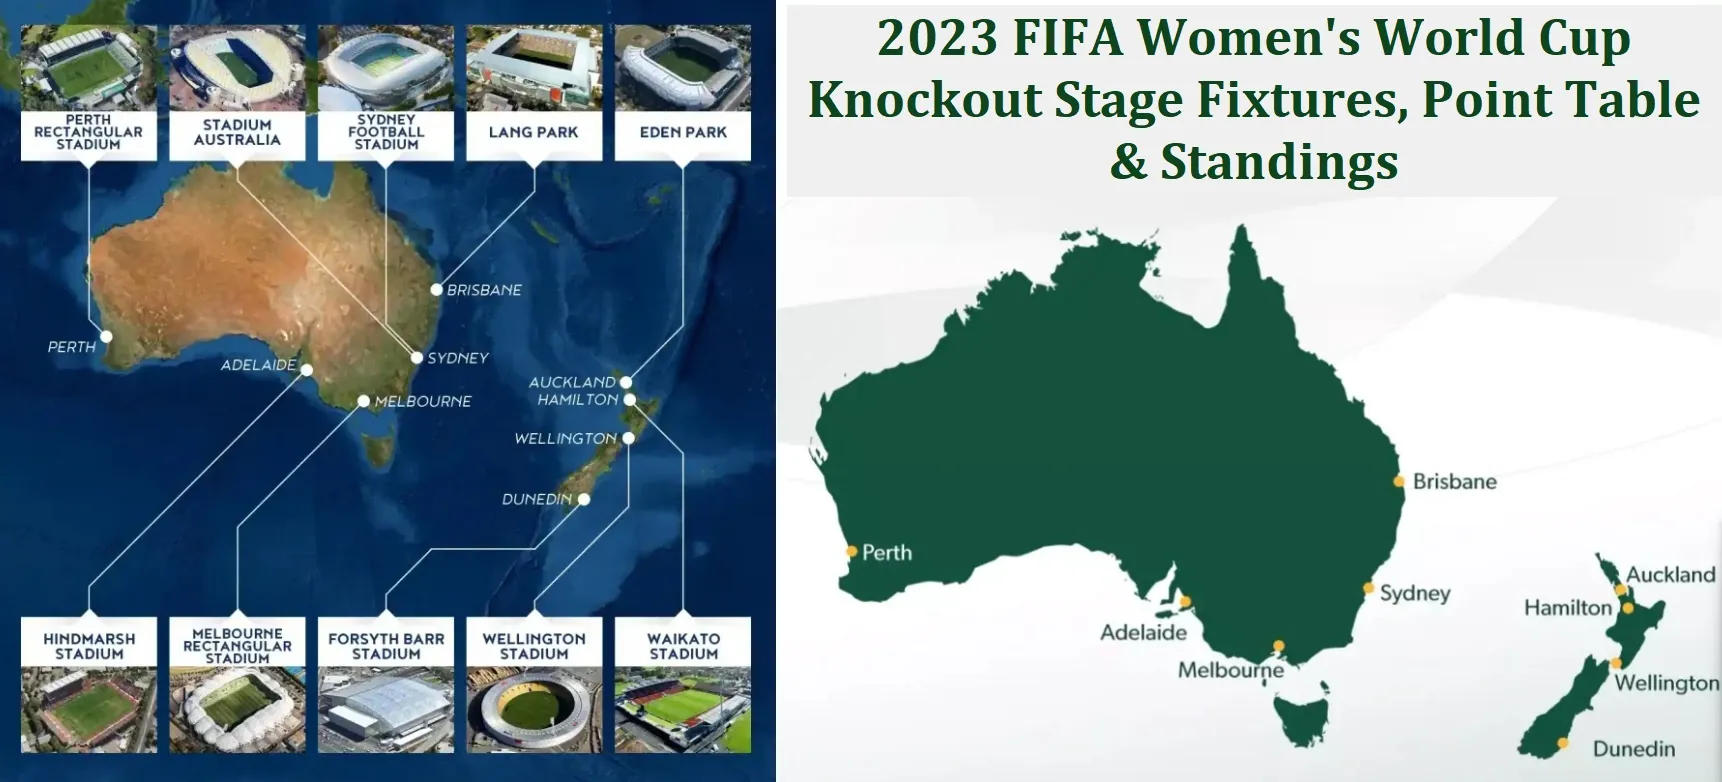 2023 FIFA Women's World Cup Knockout Stage Fixtures, Point Table & Standings